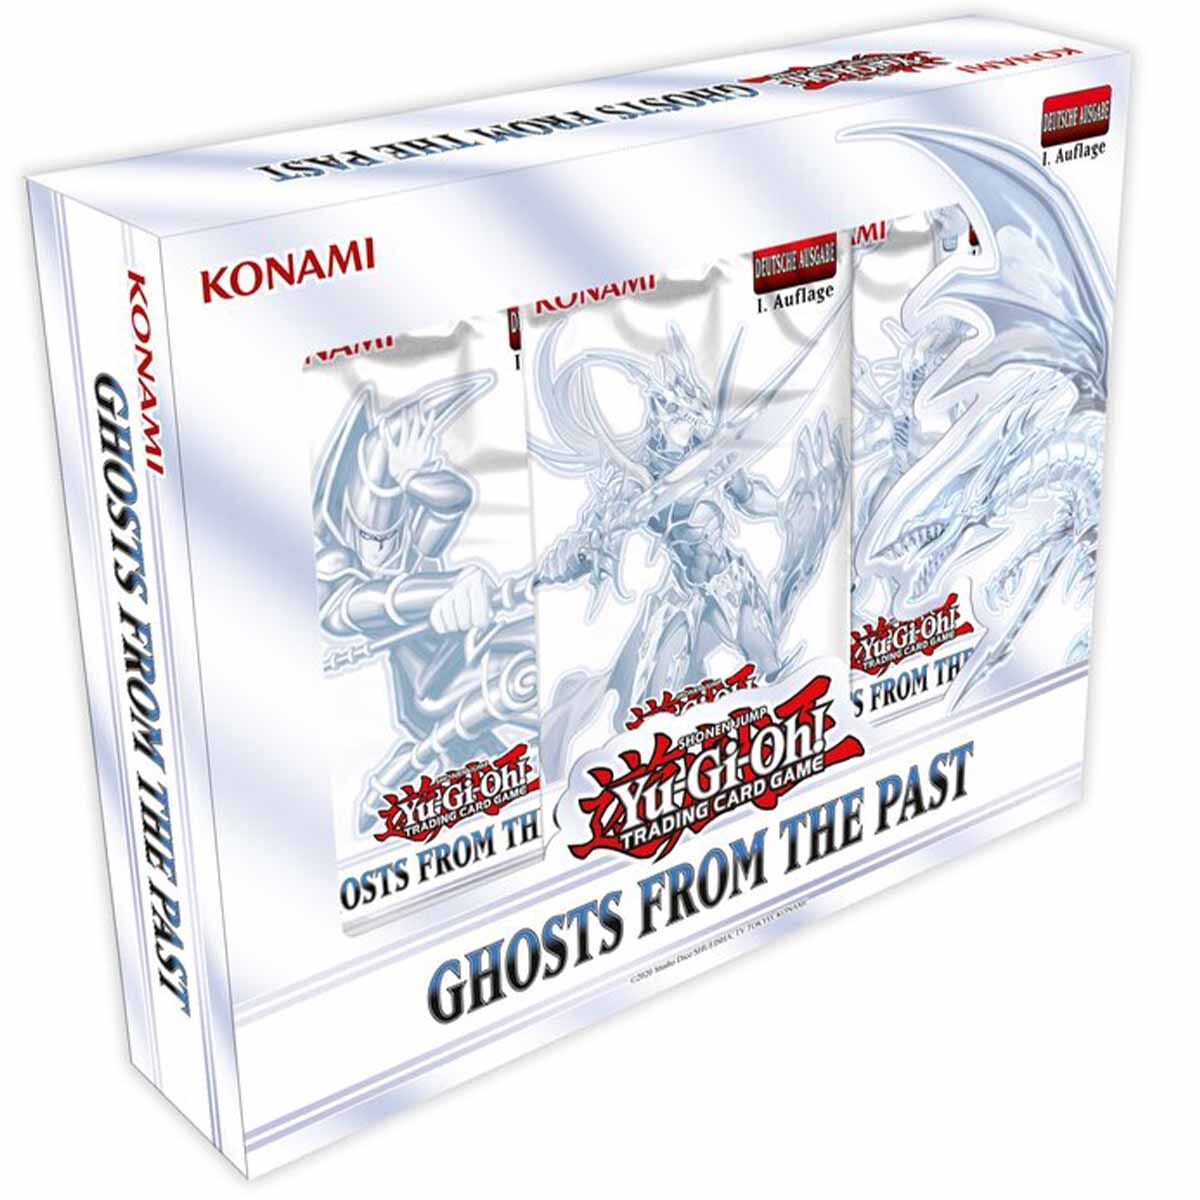 Ghosts From the Past Collection Box - 1. Auflage - Yu-Gi-Oh! - DE